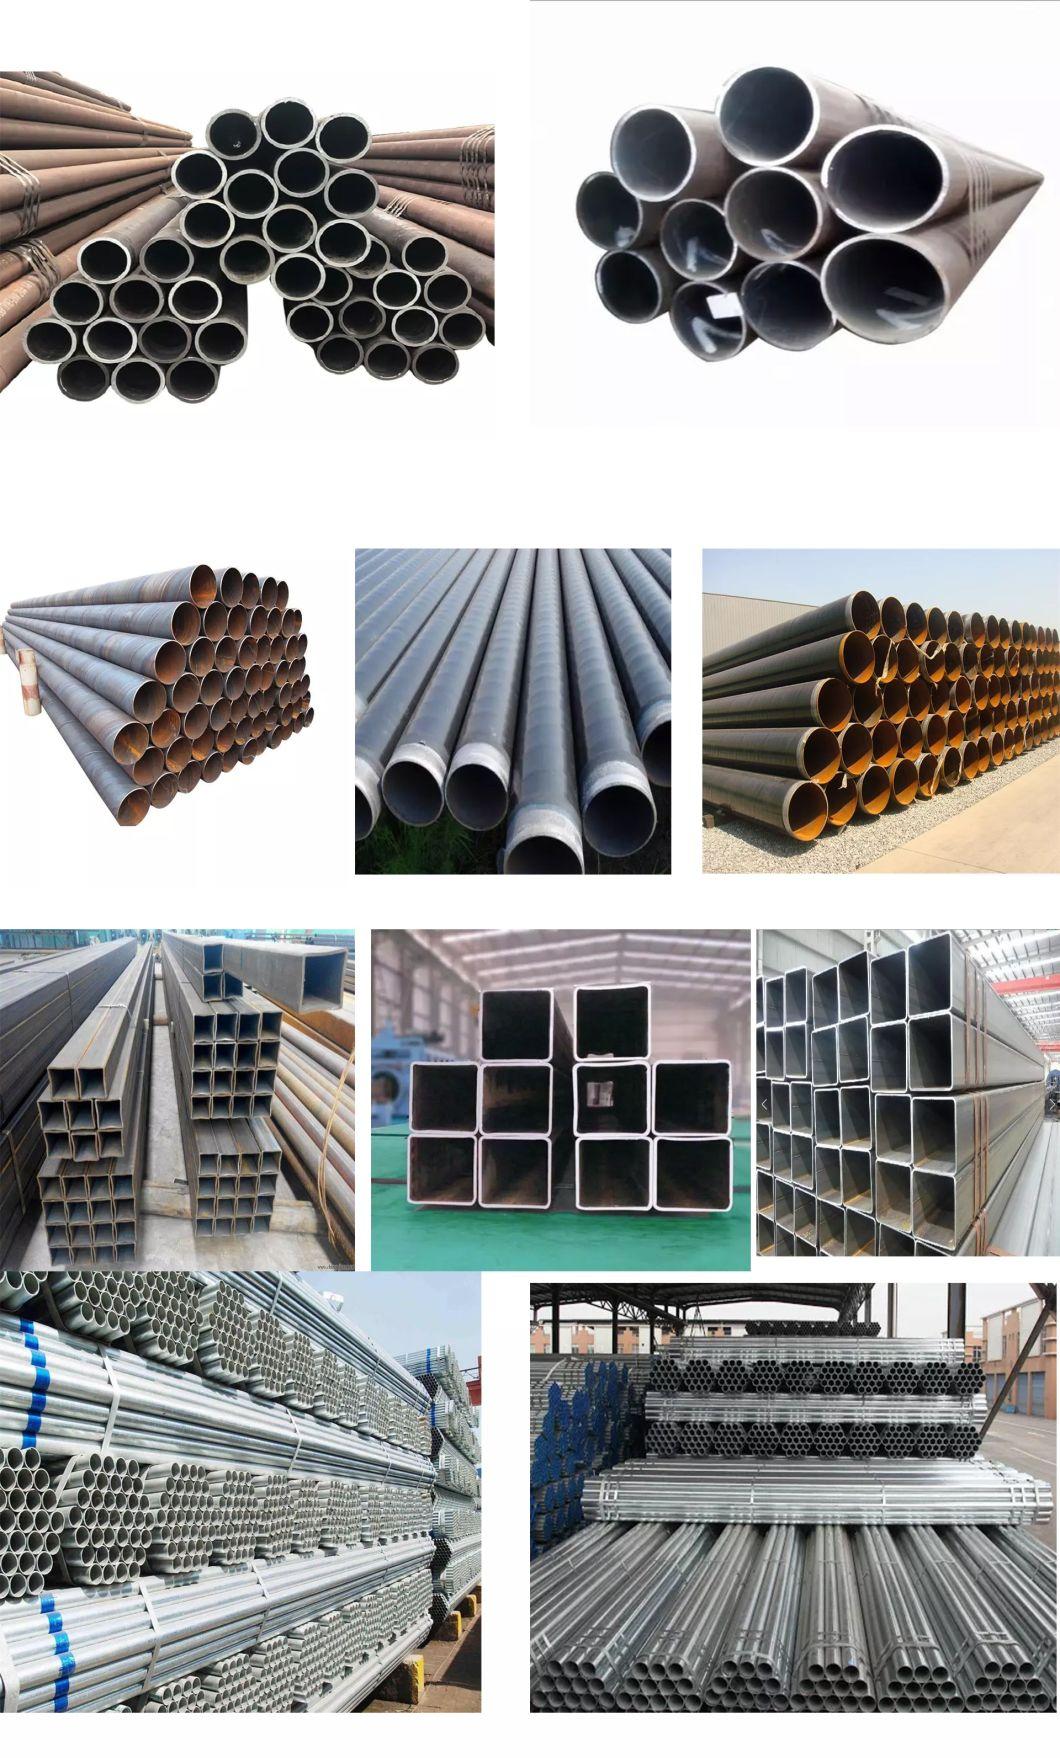 Mild Steel Pipe SAE 1020 Seamless Steel Pipe AISI 1018 Seamless Carbon Steel Pipe Sizes and Price List